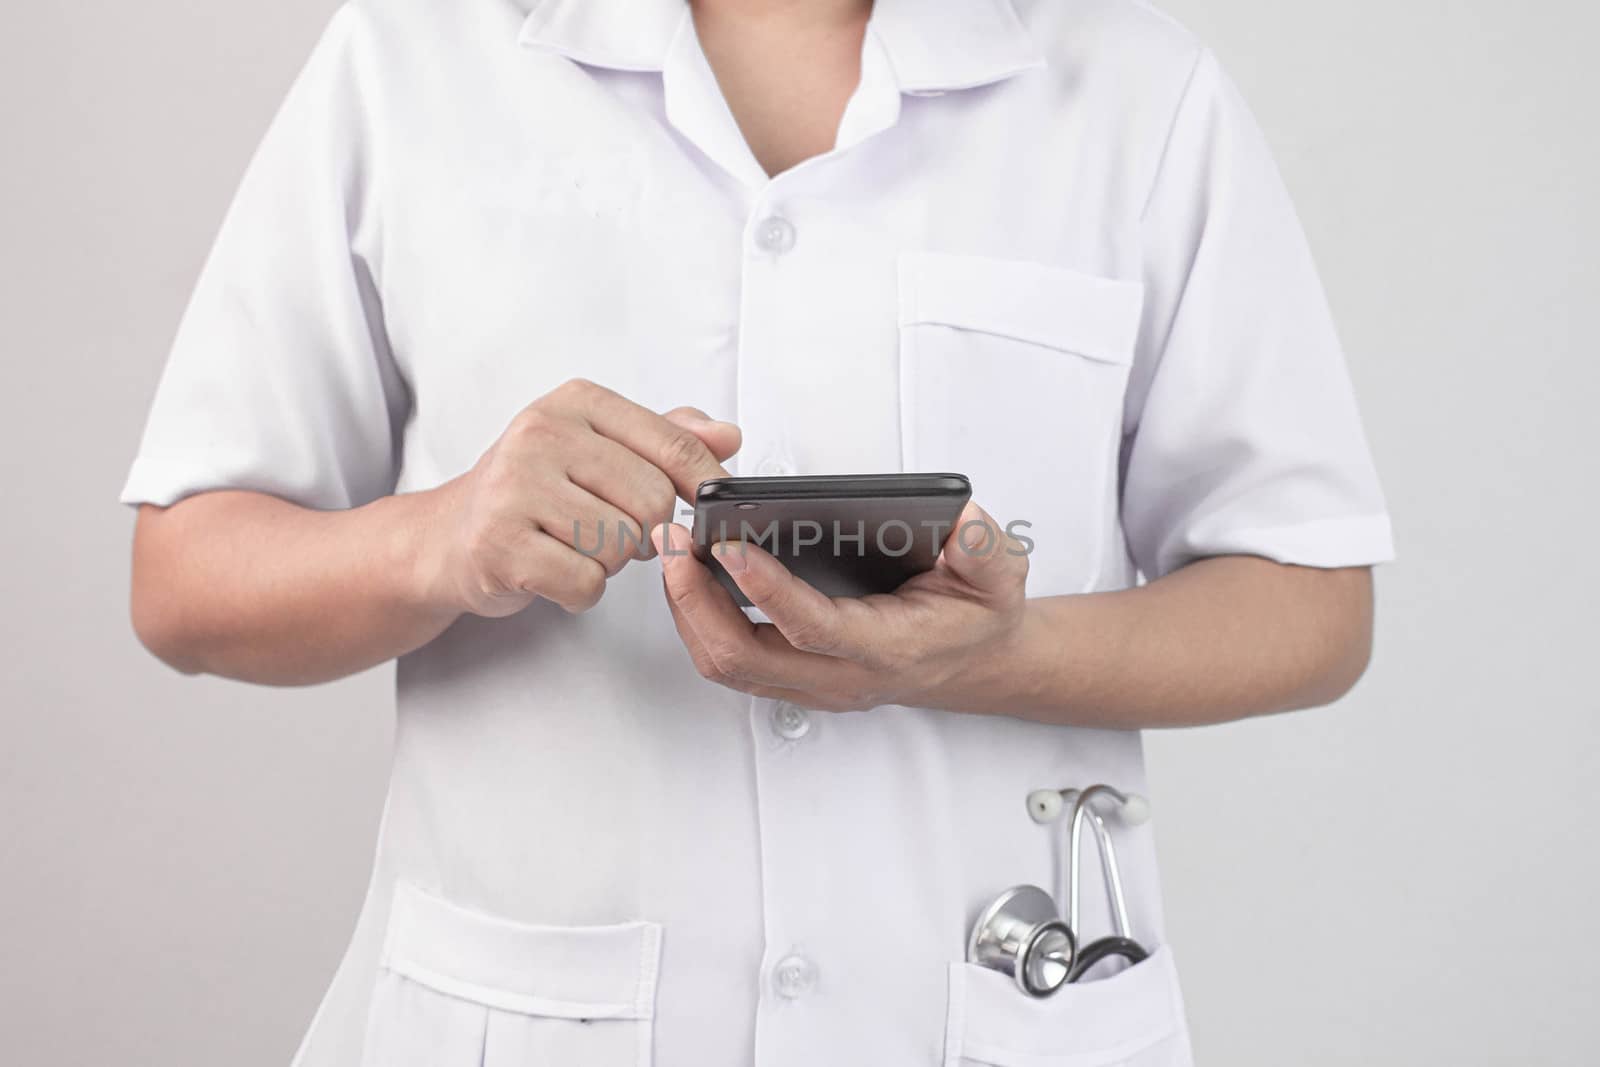 Confident young woman doctor using smartphone with stethoscope in her pocket and stand over grey background.